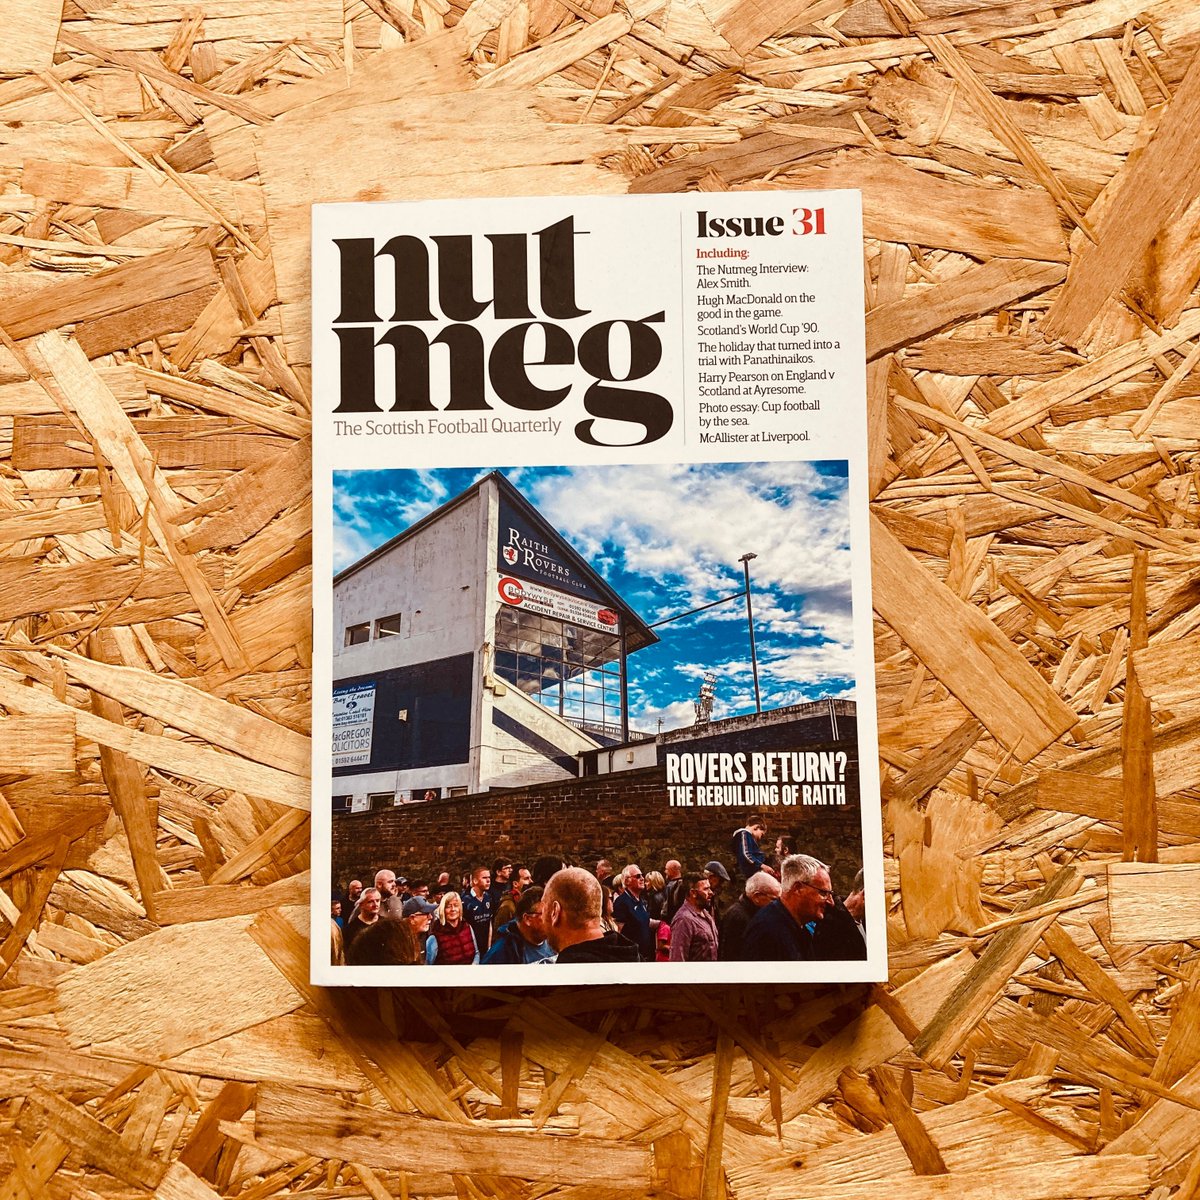 𝐍𝐄𝐖 | @NutmegMagazine #31 🏴󠁧󠁢󠁳󠁣󠁴󠁿 We've got the latest issue of this Scottish football quarterly w/ @d_gray_writer @ginkers @kathoakley @Hibs80s @seanccole @TrueColoursKits @nirvanadiary @LiamGrimshaw12 @HeartandHutts @SPFLWatch @reeceymullen + more 🛒 stanchionbooks.com/collections/nu…